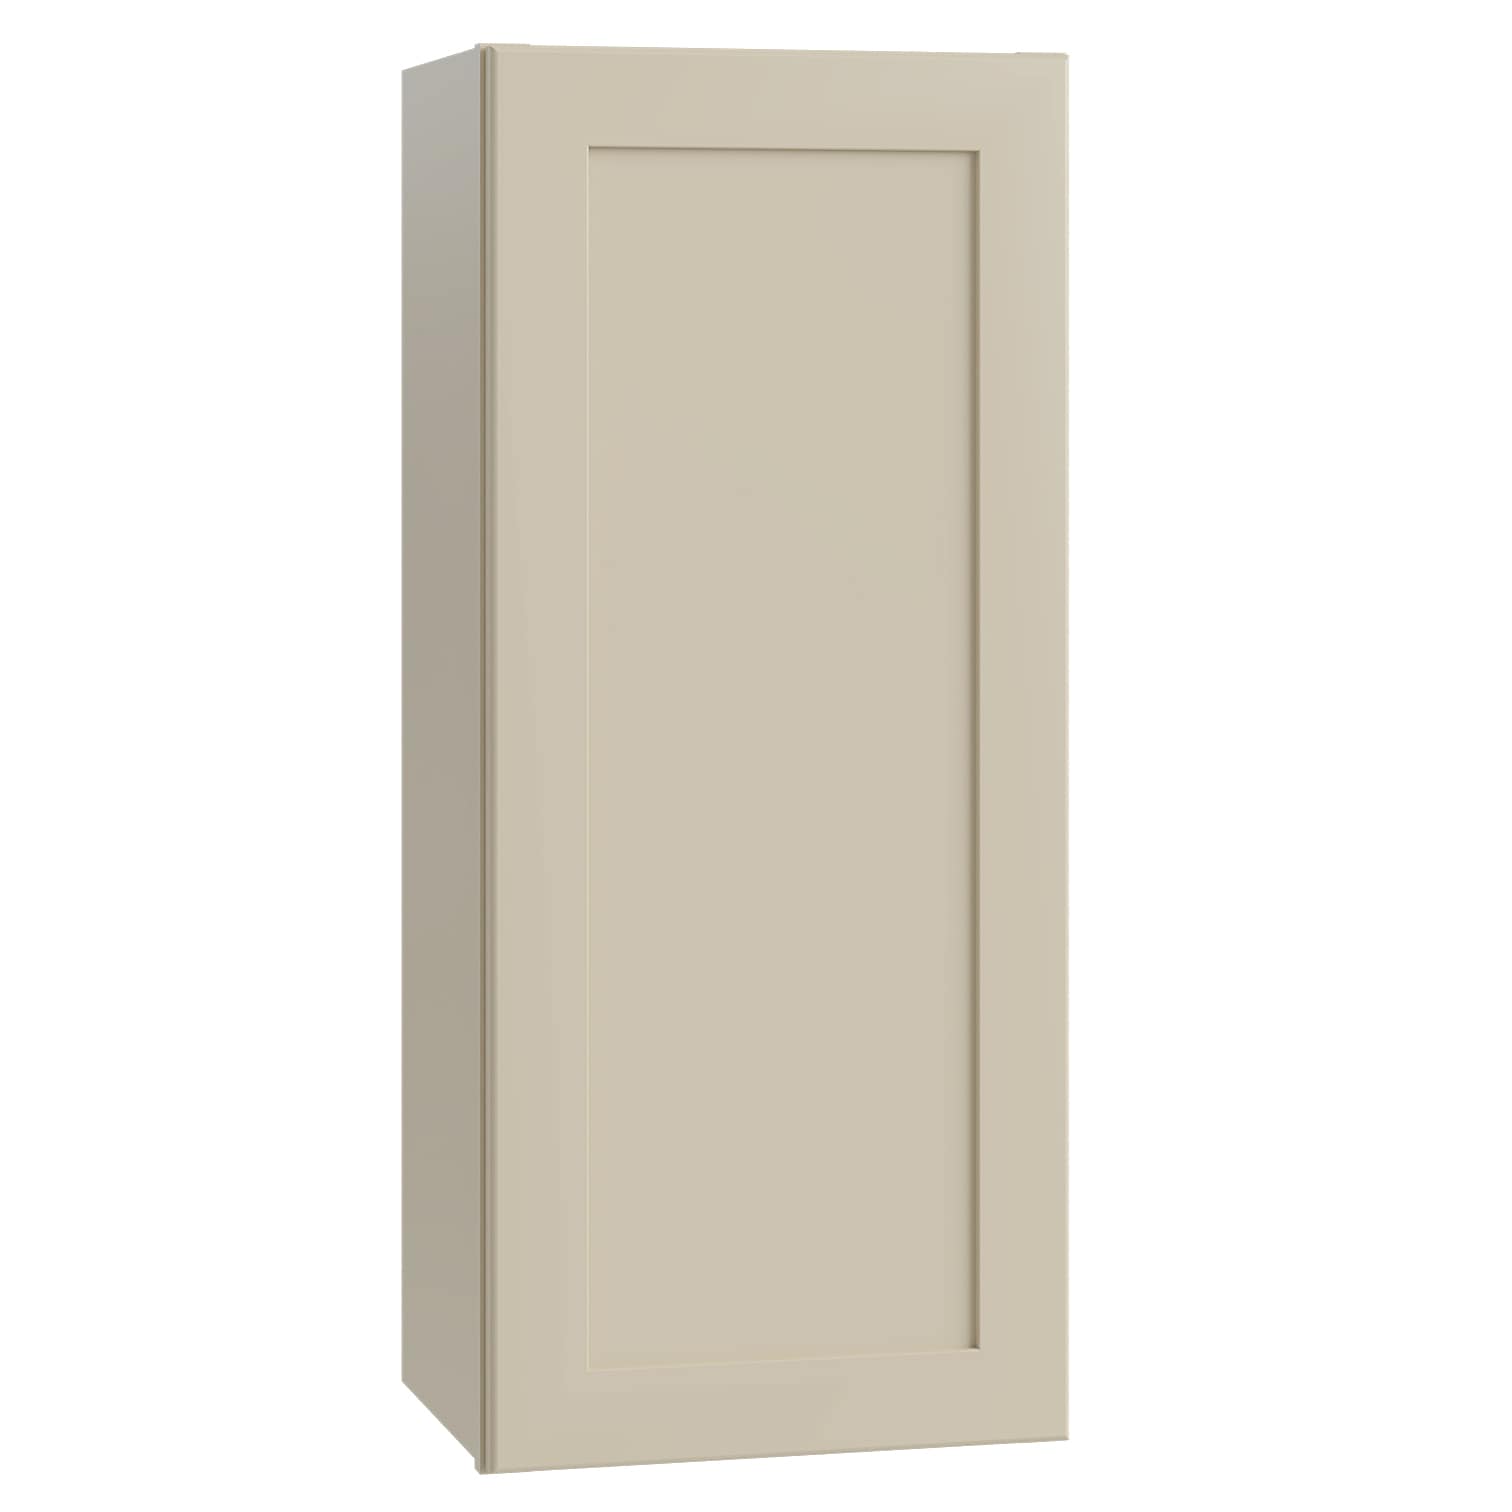 Luxxe Cabinetry 18-in W x 42-in H x 12-in D Norfolk Blended Cream Painted Door Wall Fully Assembled Semi-custom Cabinet in Off-White | W1842L-NBC